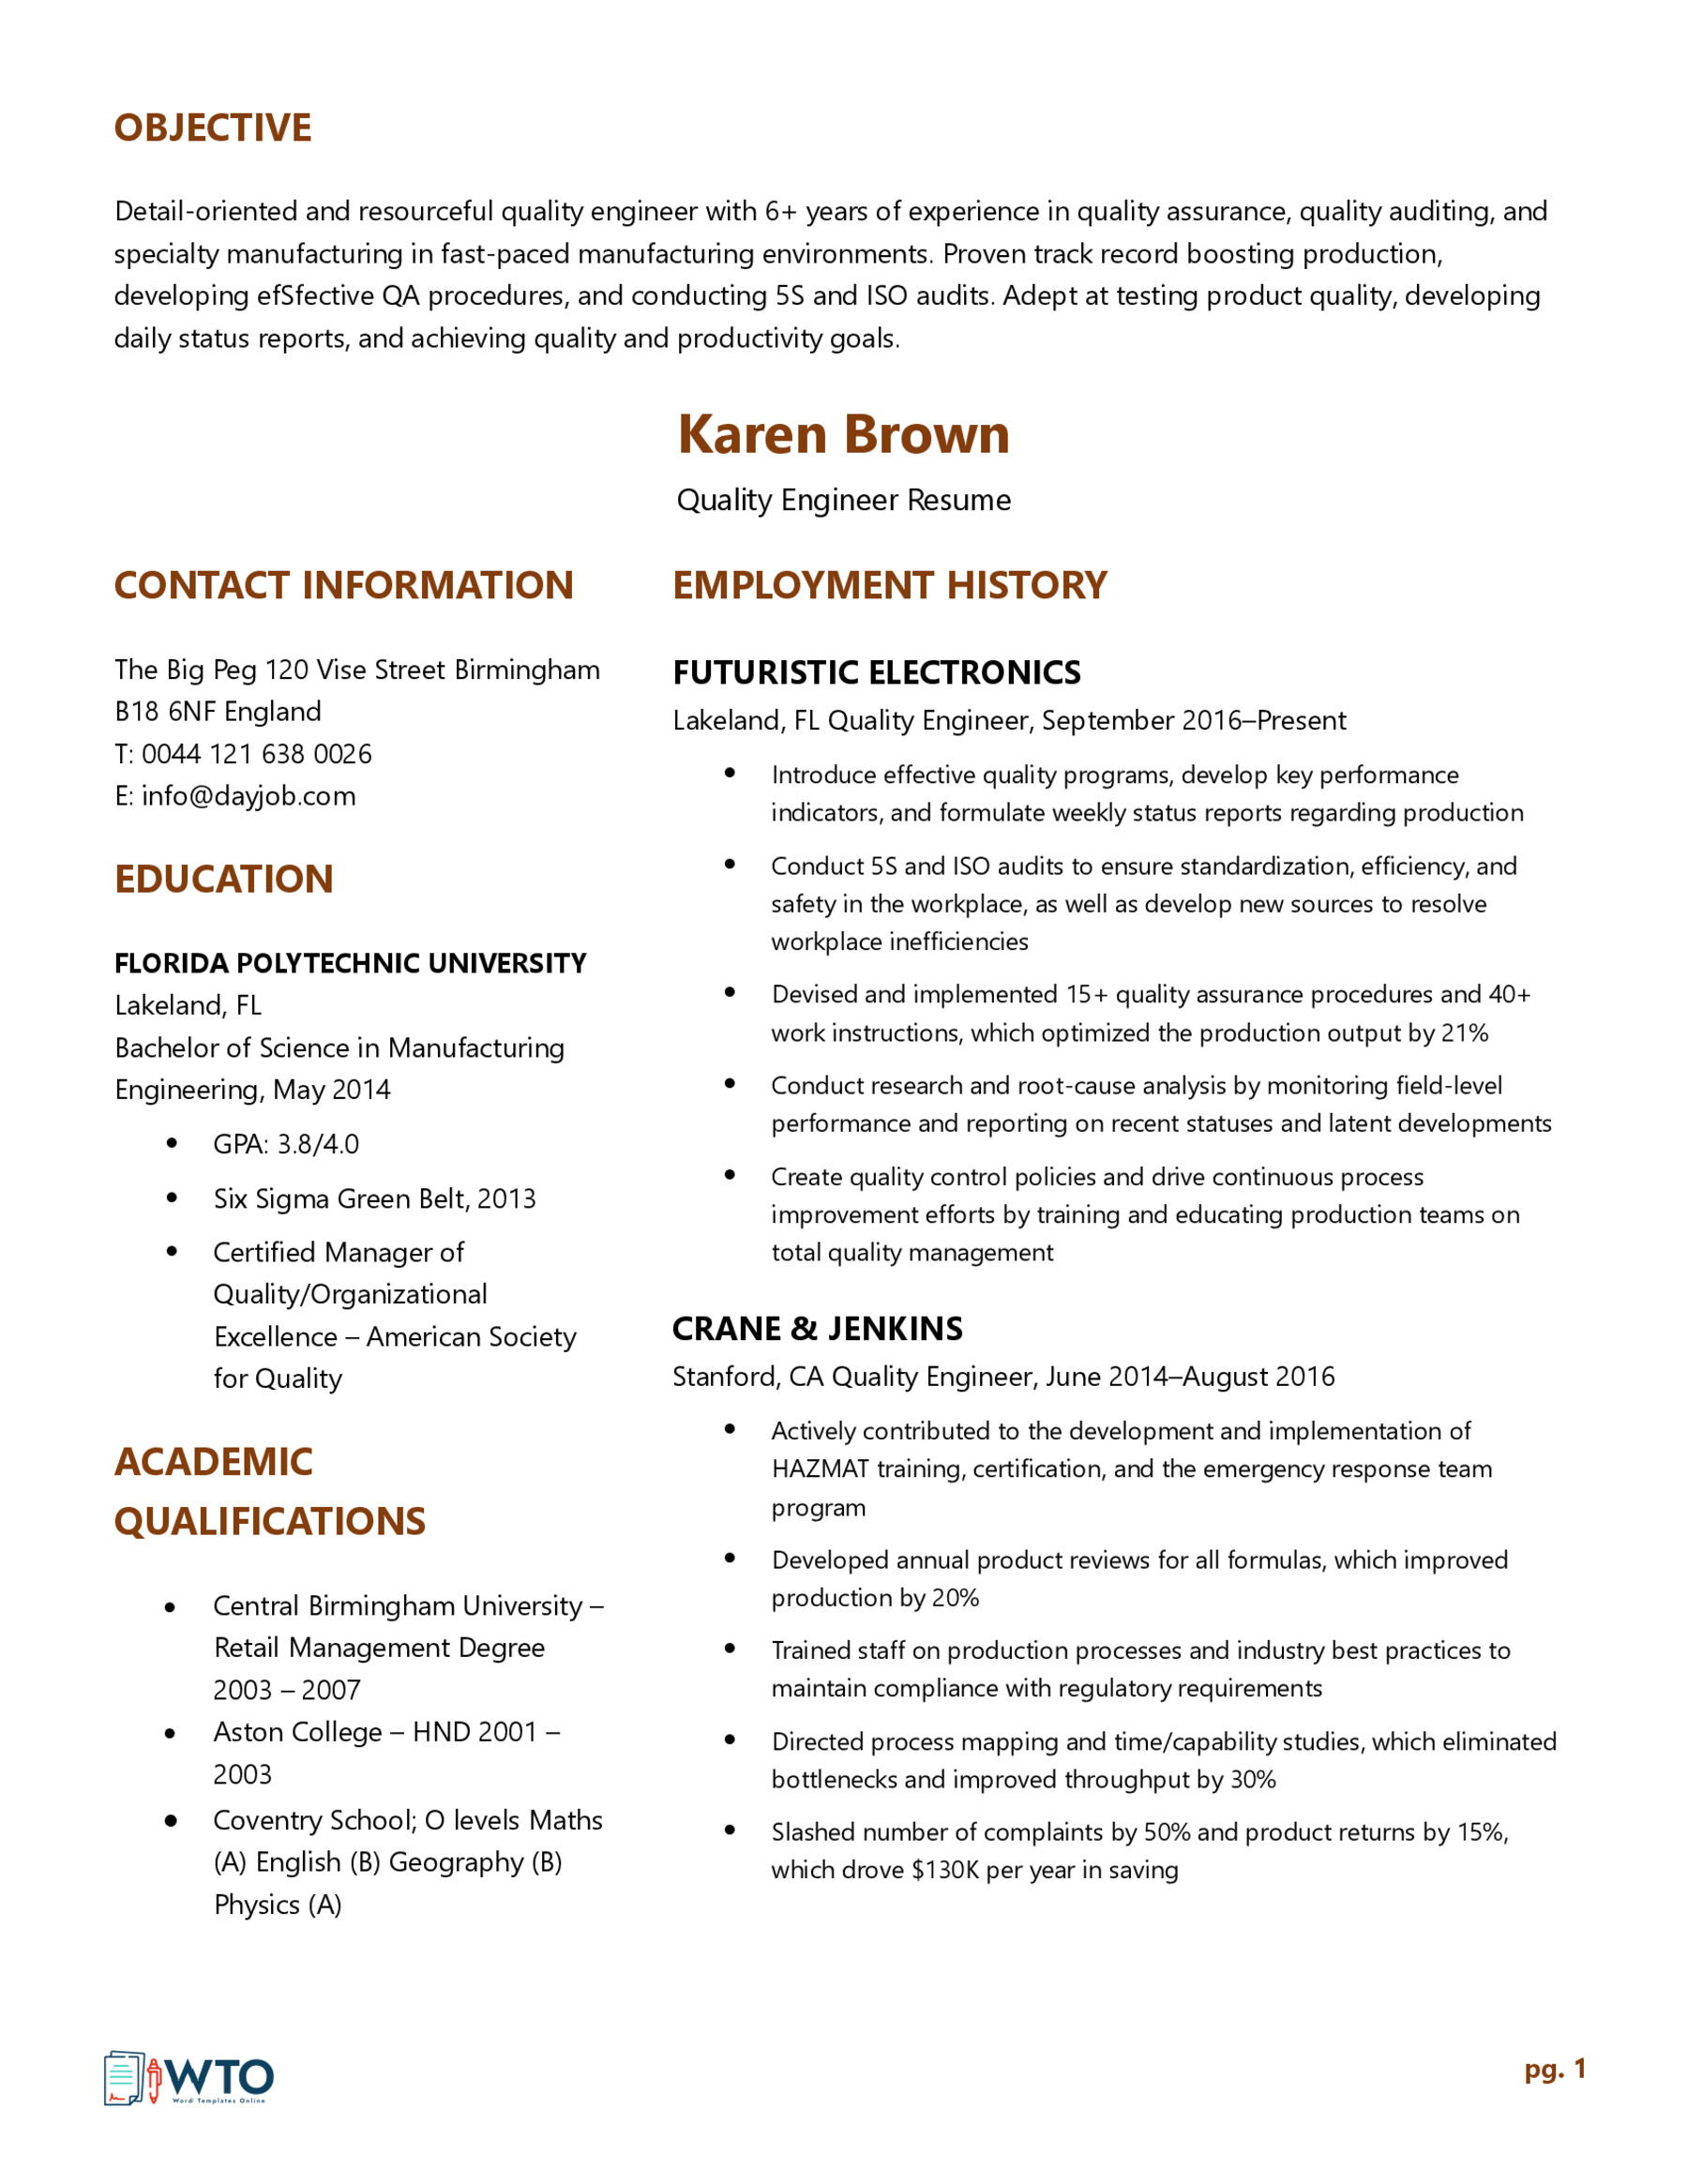 Quality Engineer Resume Template - Simple and Clean Design